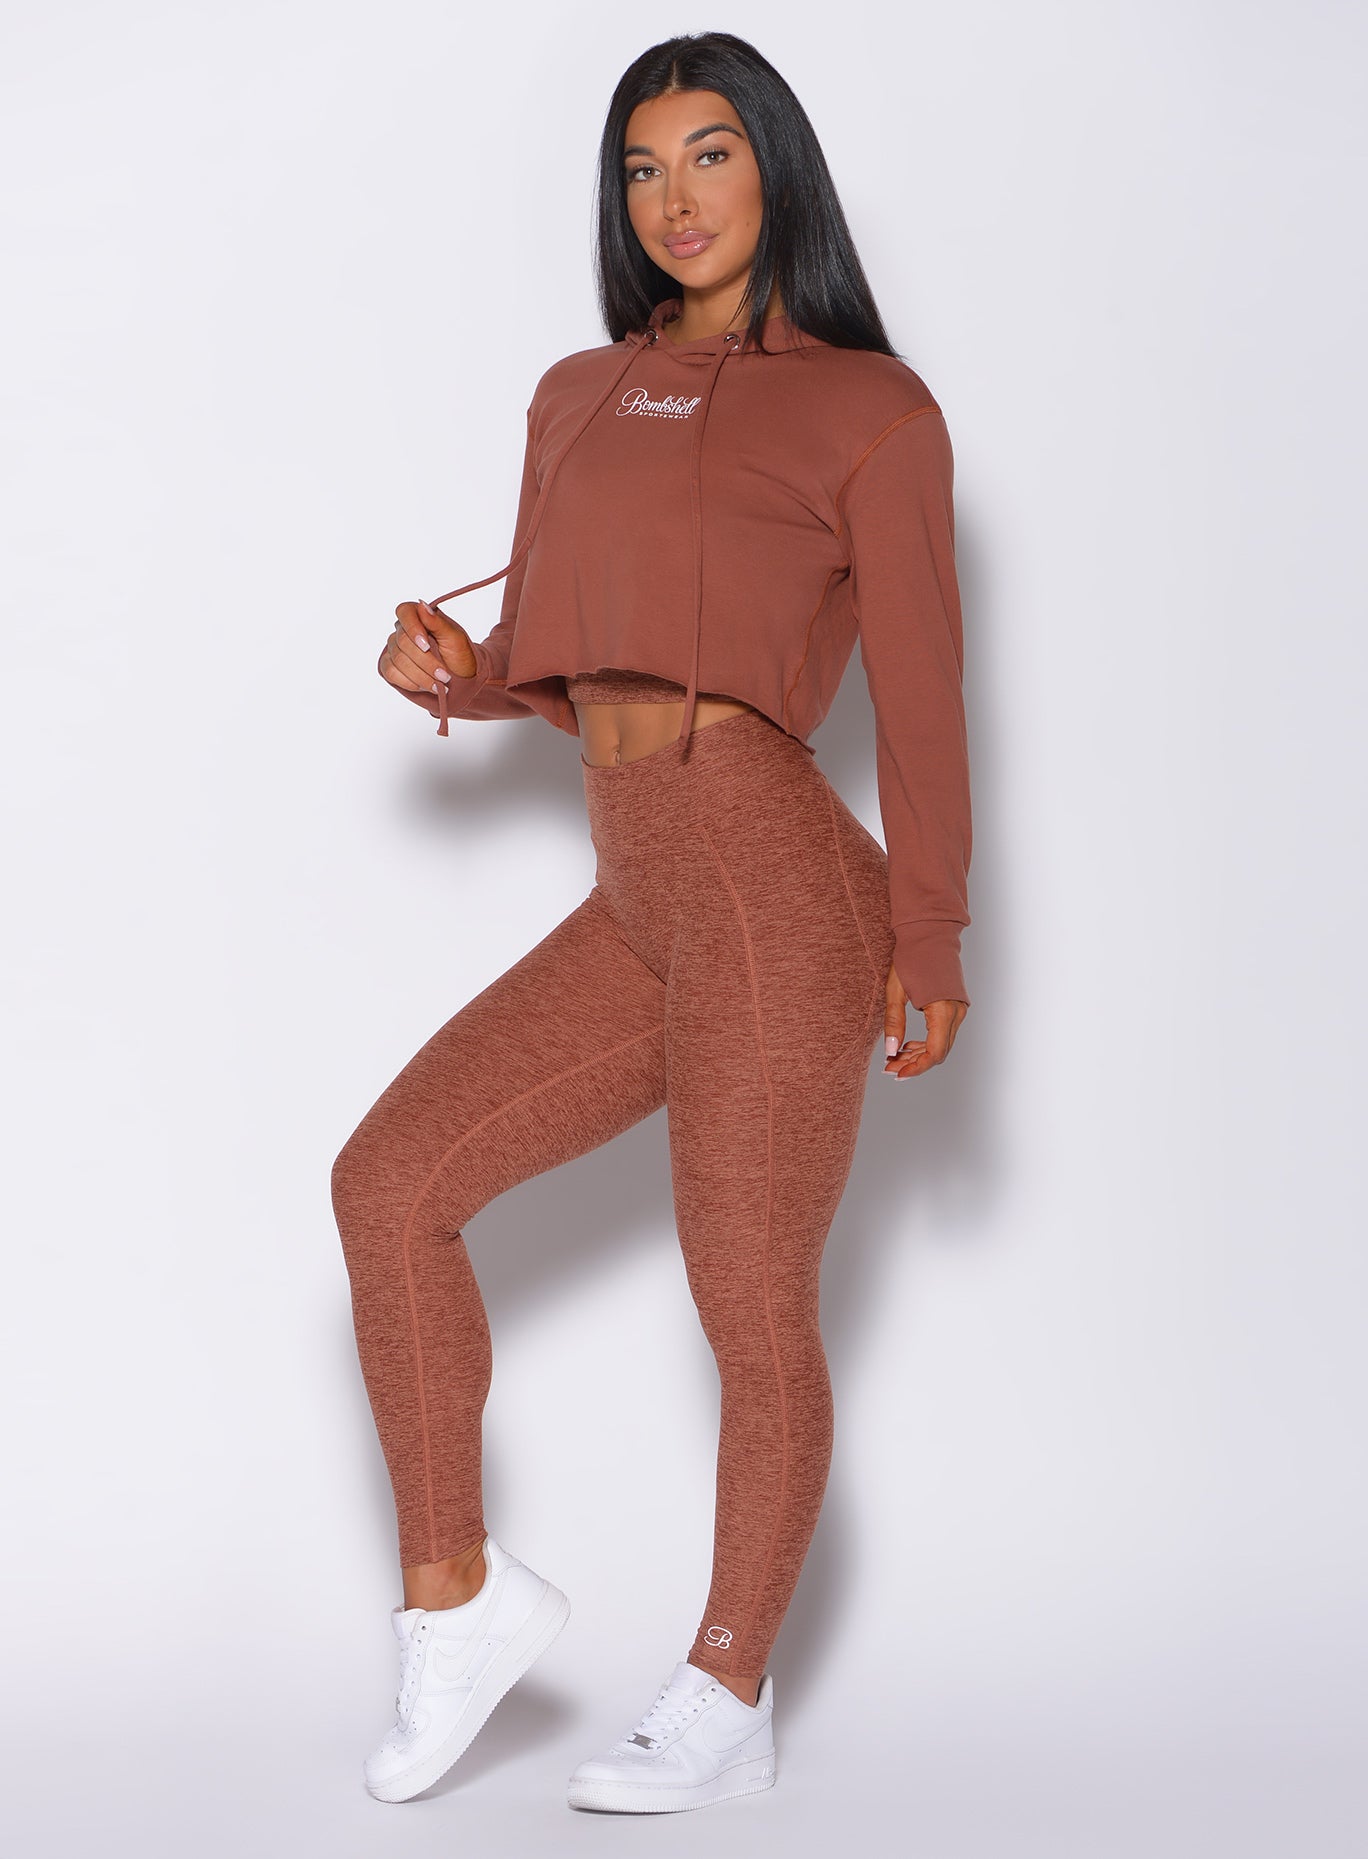 Front profile view of the model in our bombshell hoodie in caramel color and a matching high rise leggings